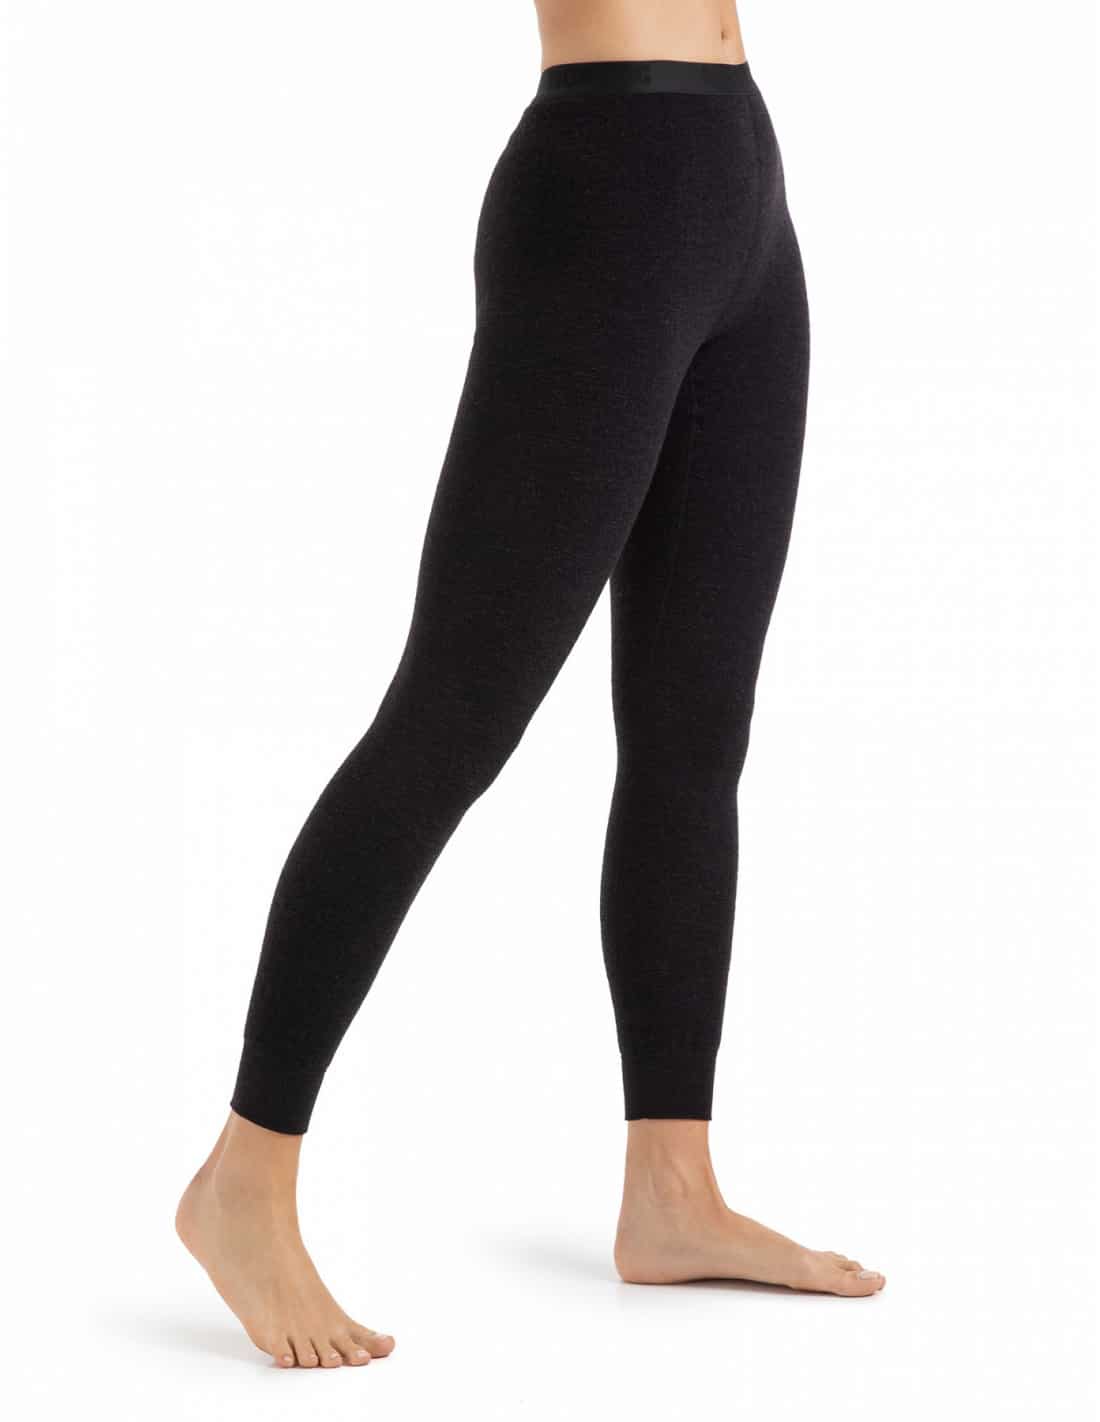 Womens High Waist Black Compression Merino Wool Leggings Thick Velvet, Warm  Winter Pants With Lamb Wool, Cold Resistant From Freshadang, $17.37